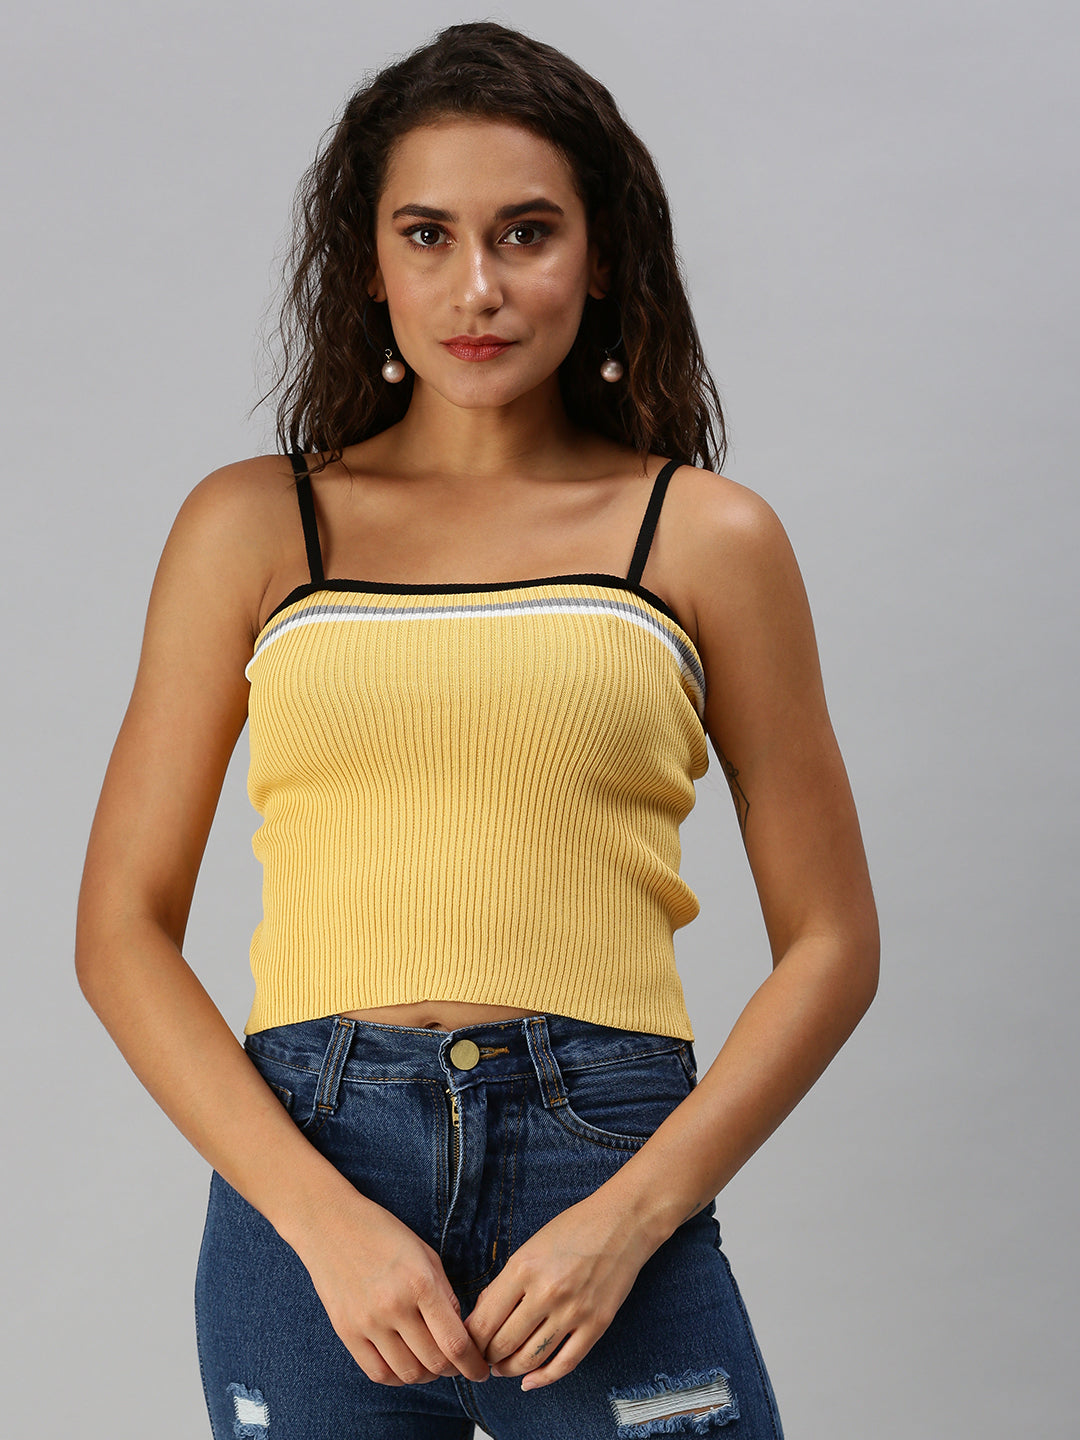 Women Shoulder Straps Solid Yellow Fitted Top